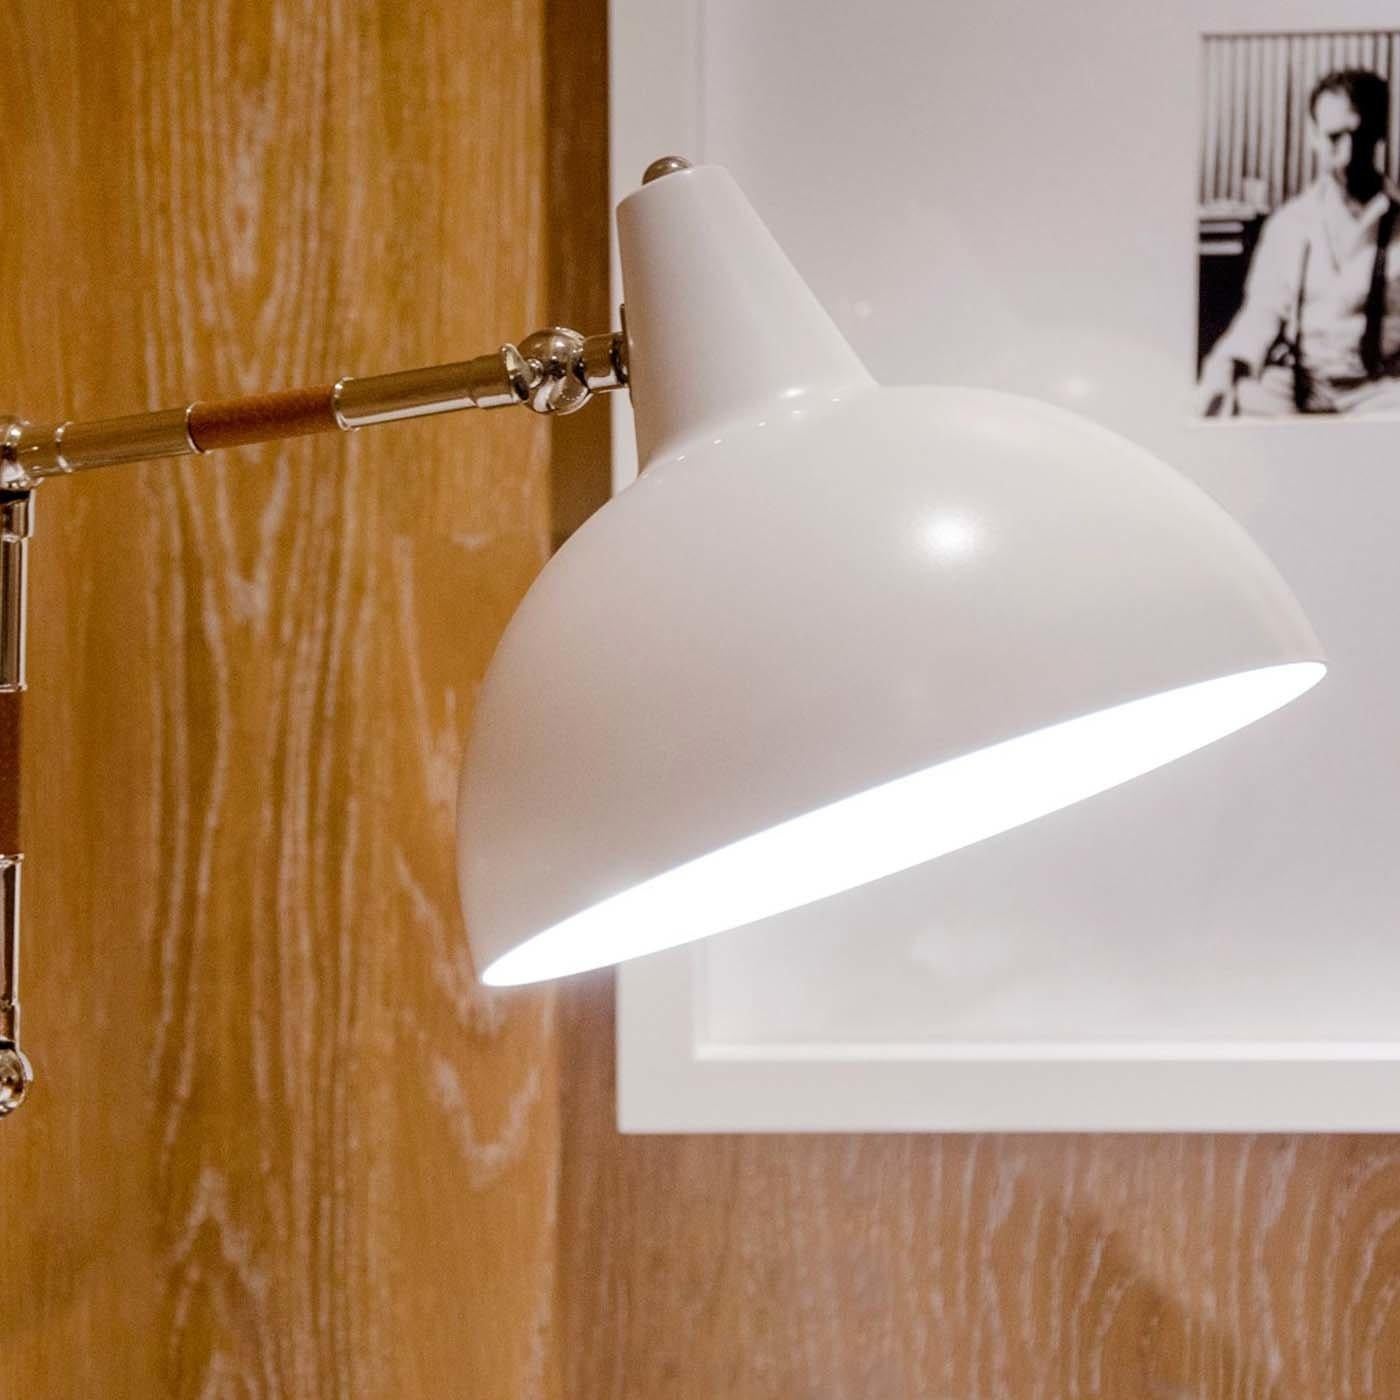 A revisitation of retro desk lamps, the Lamal Wall Light radiates timeless style. With three different hinges, the light with a painted metal shade is easy to position over a work space or next to a bed as a reading lamp. The arm is accented with